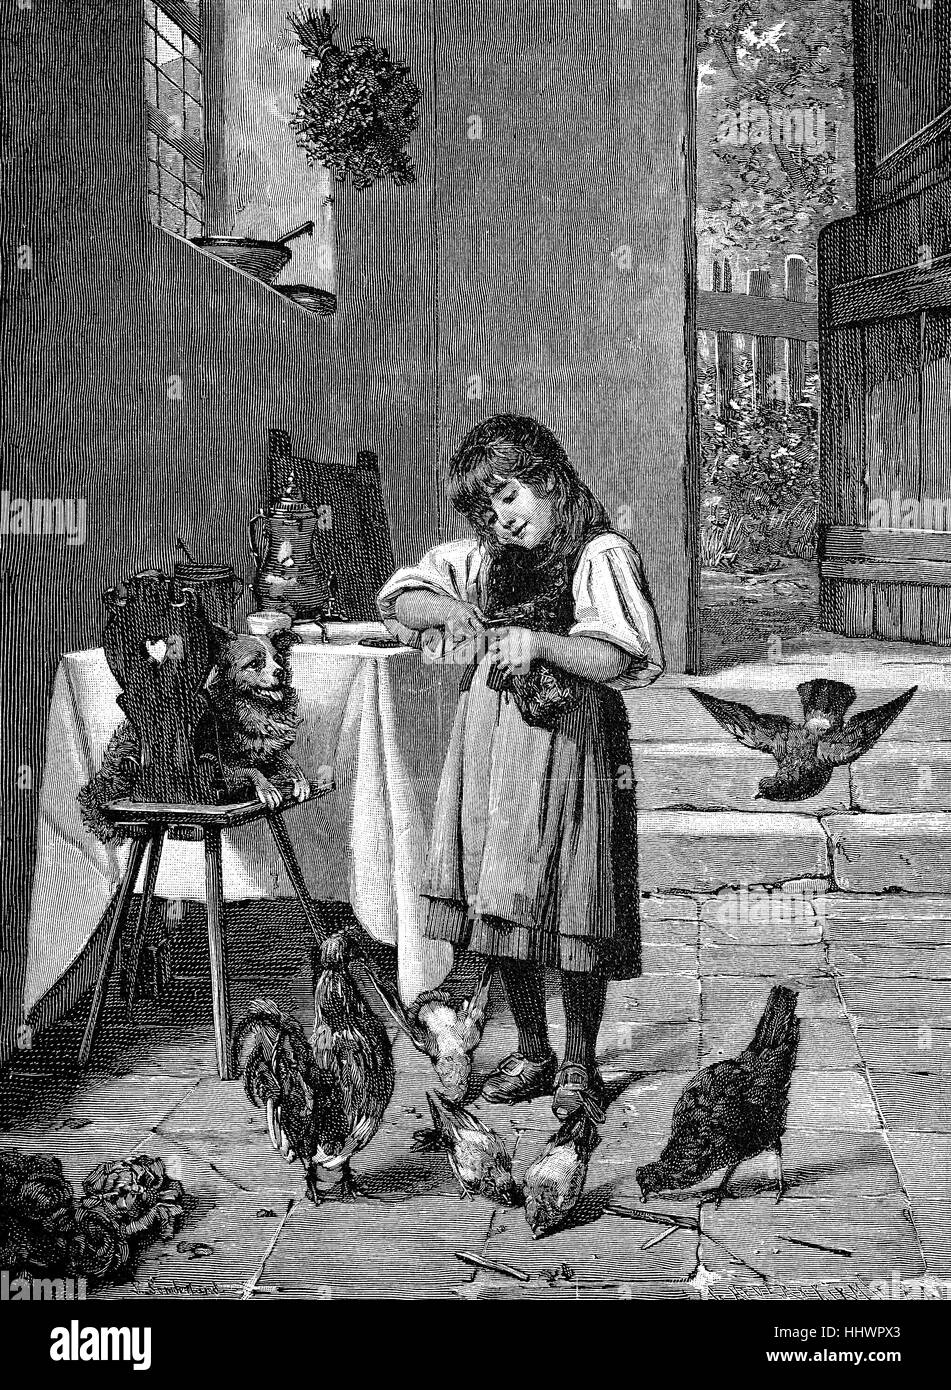 Shared breakfast, child breakfast with dog, chickens and pigeons, according to a painting by Fr. Sonderland, Germany, historical image or illustration, published 1890, digital improved Stock Photo